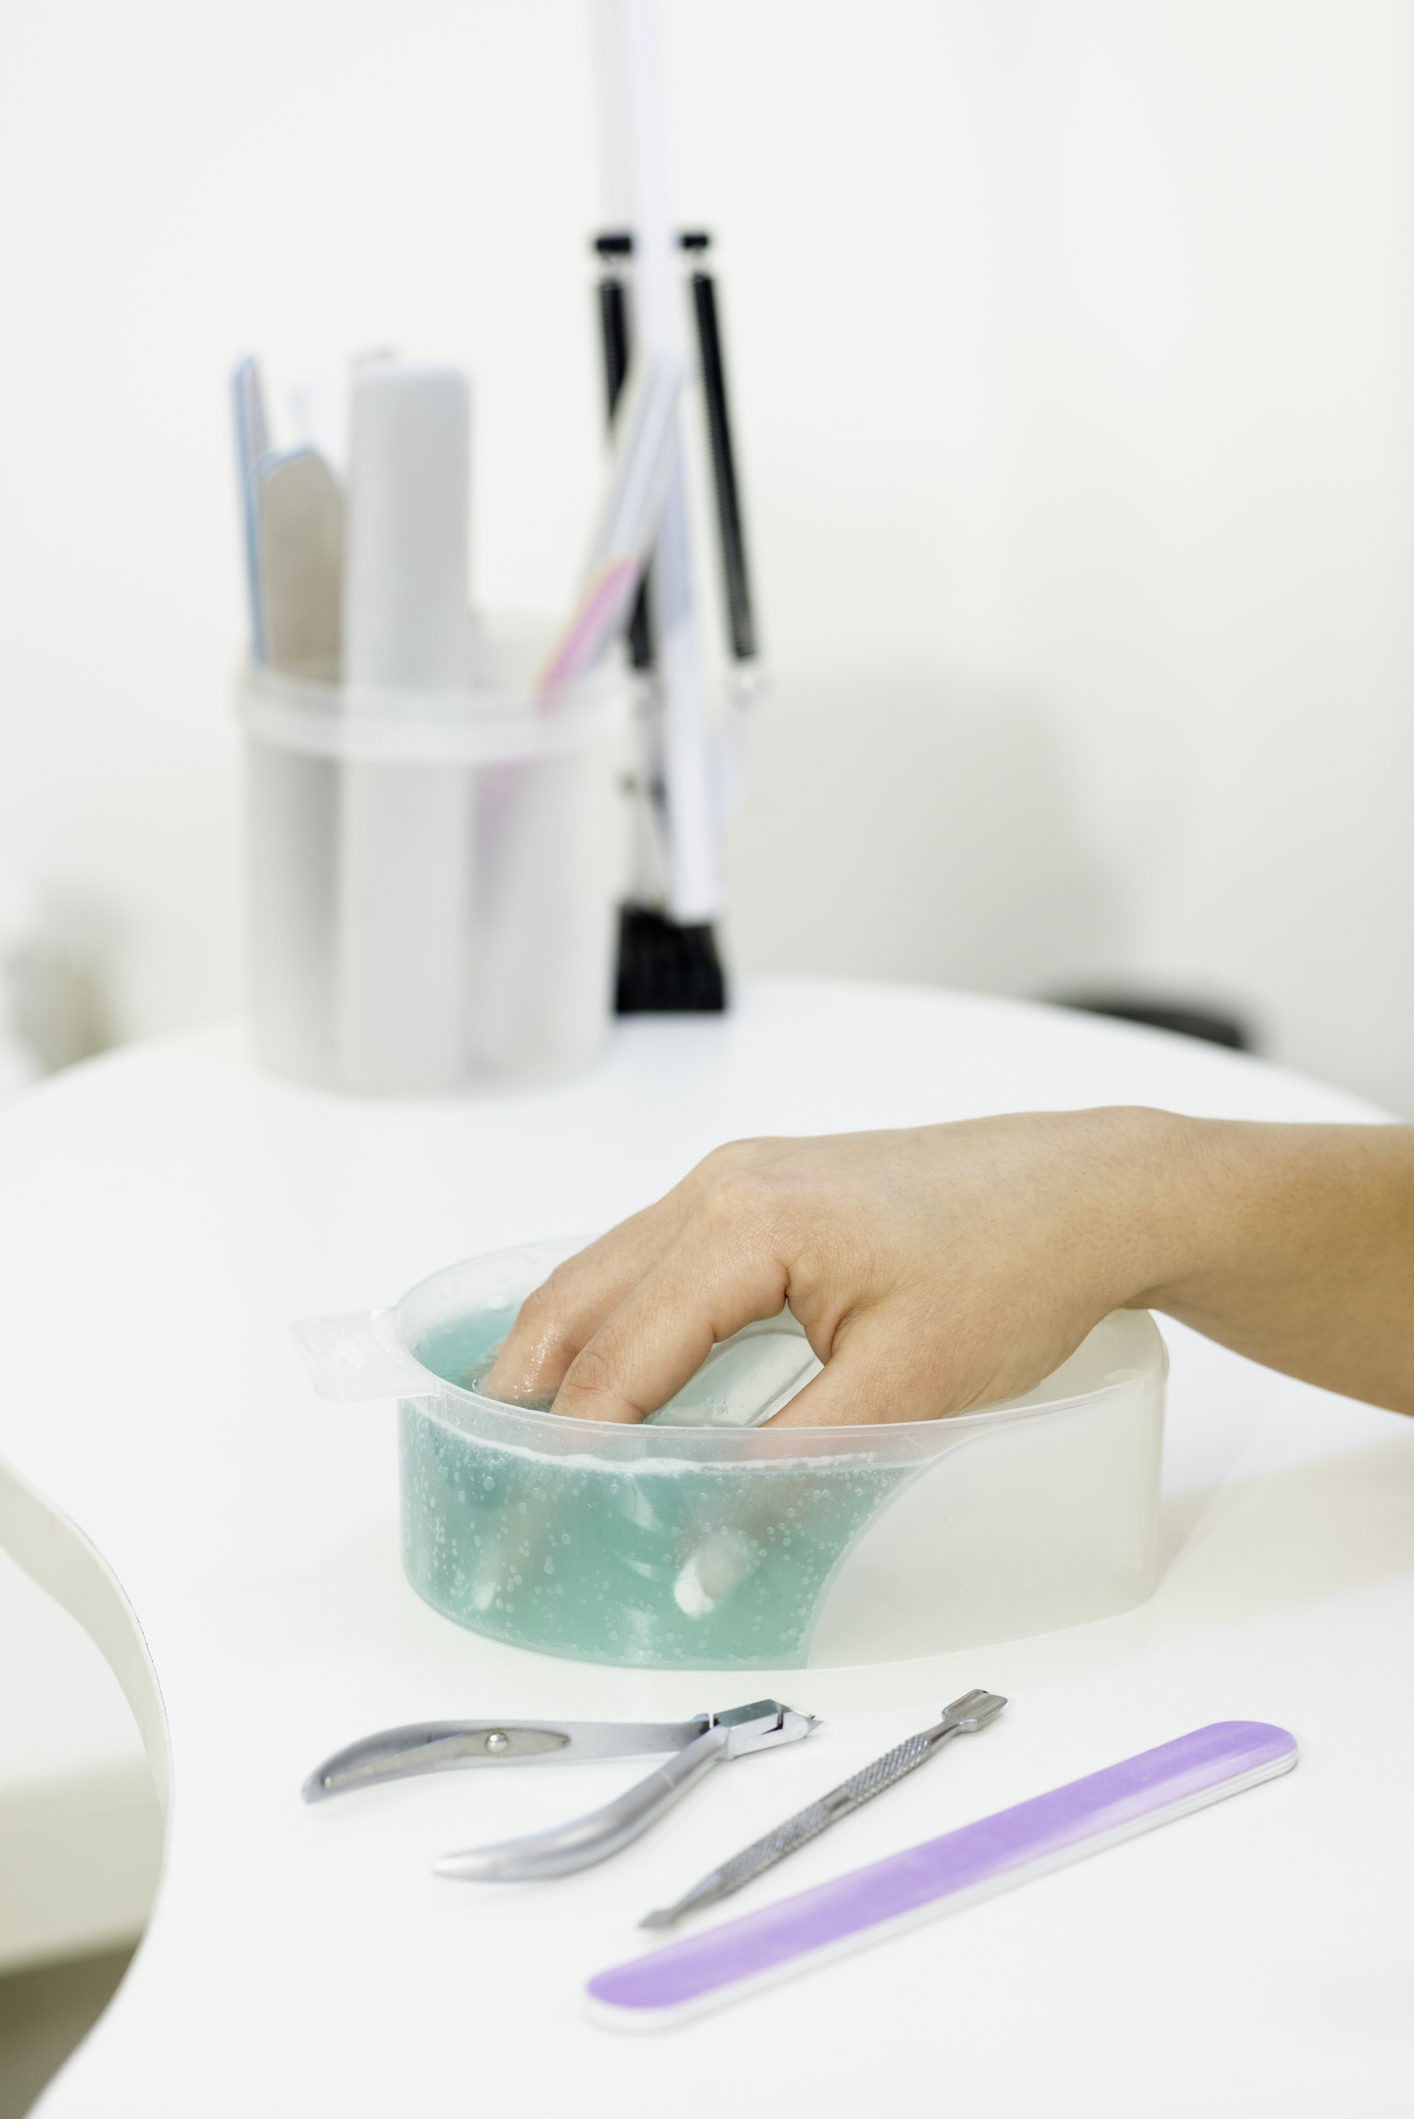 Woman soaking acrylic nails in acetone in plastic bowl.